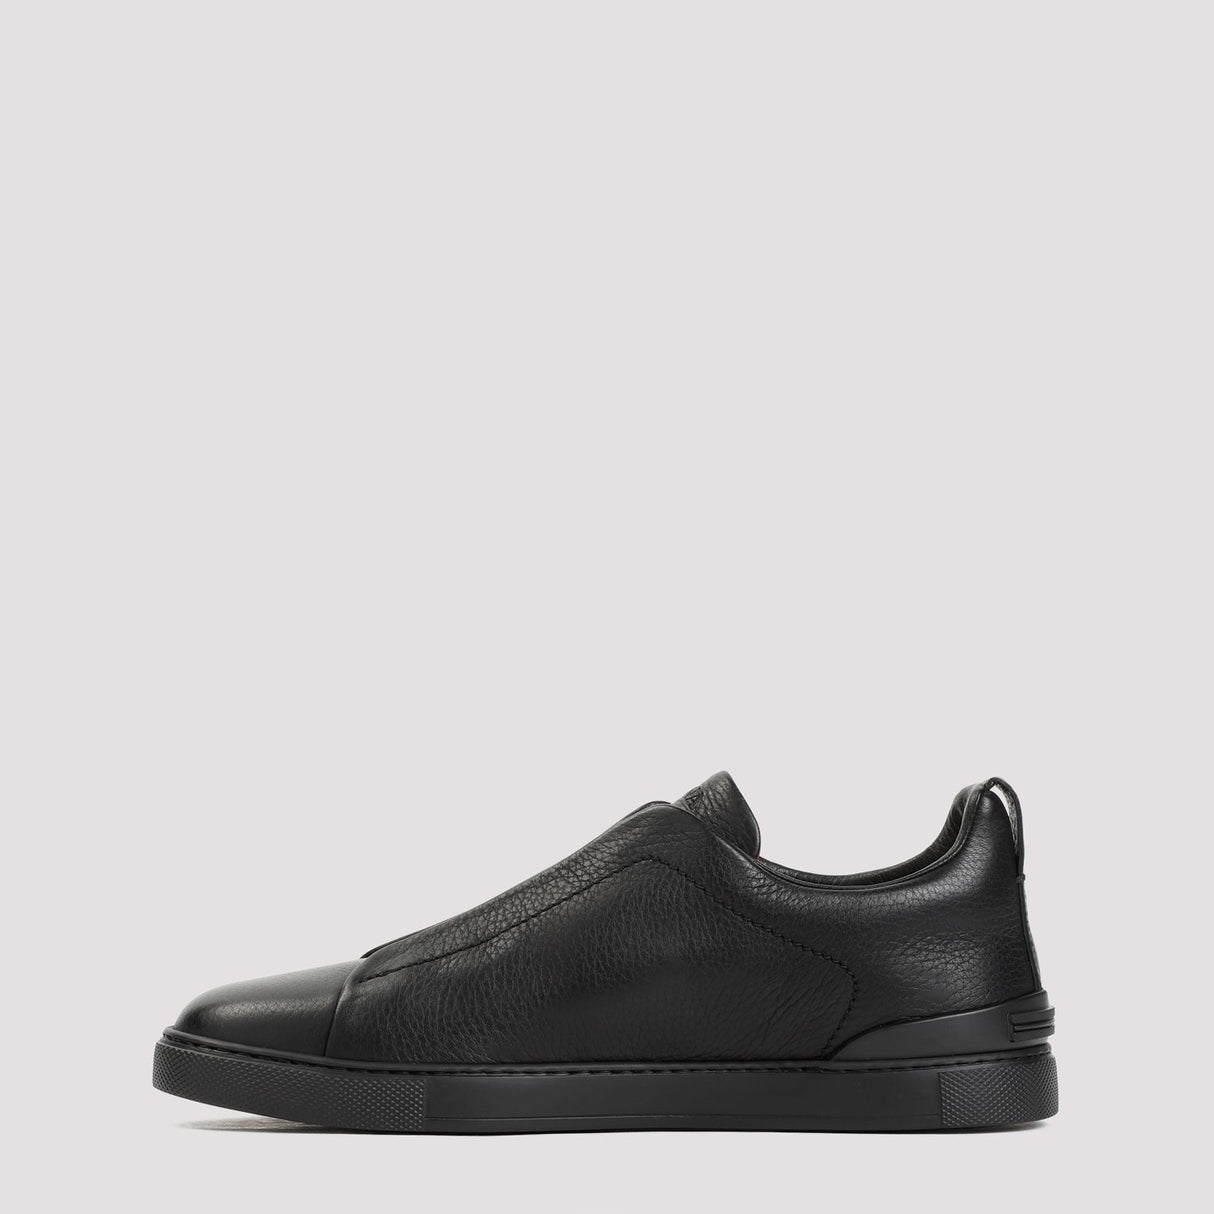 ZEGNA Stylish Triple Stitch Sneakers for Men in Black